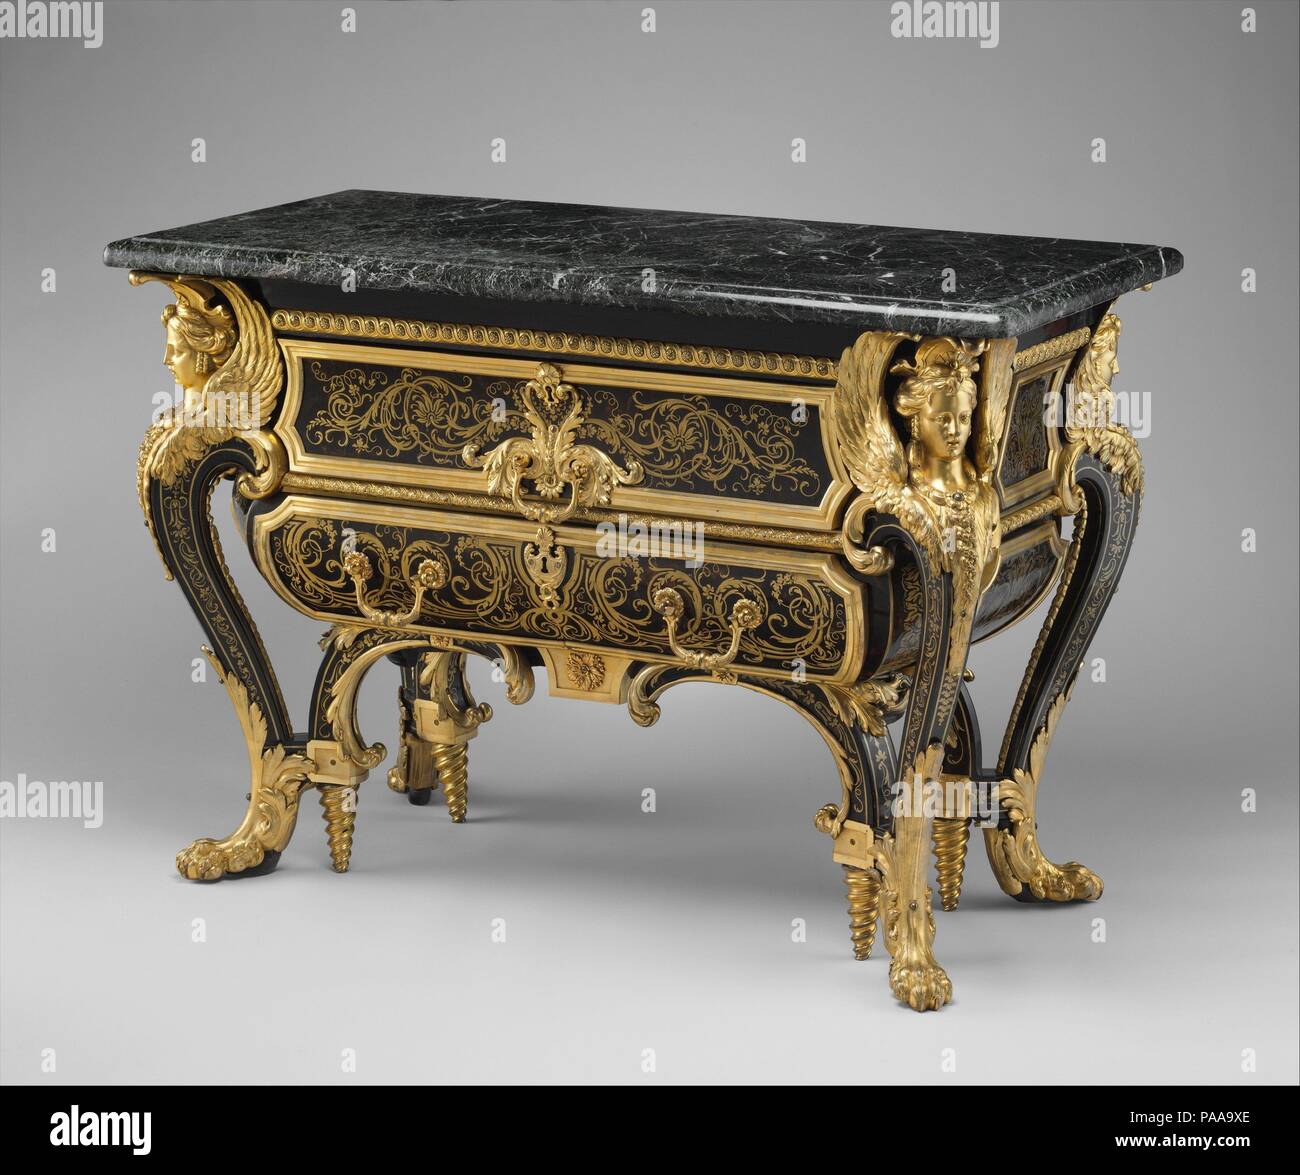 Commode. Culture: French. Dimensions: 34 1/2 × 50 1/2 × 24 3/4 in. (87.6 × 128.3 × 62.9 cm). Maker: André Charles Boulle (French, Paris 1642-1732 Paris). Date: ca. 1710-20.  In 1708, the prototypes for this commode, then called a pair of bureaux, were delivered to the Grand Trianon by André-Charles Boulle. The duc d'Antin, director of the king's buildings, wrote to Louis XIV: 'I was at the Trianon inspecting the second writing desk by Boulle; it is as beautiful as the other and suits the room perfectly.'[1] Not until the Trianon inventory of 1729 were the pieces described as 'commodes.' (They  Stock Photo